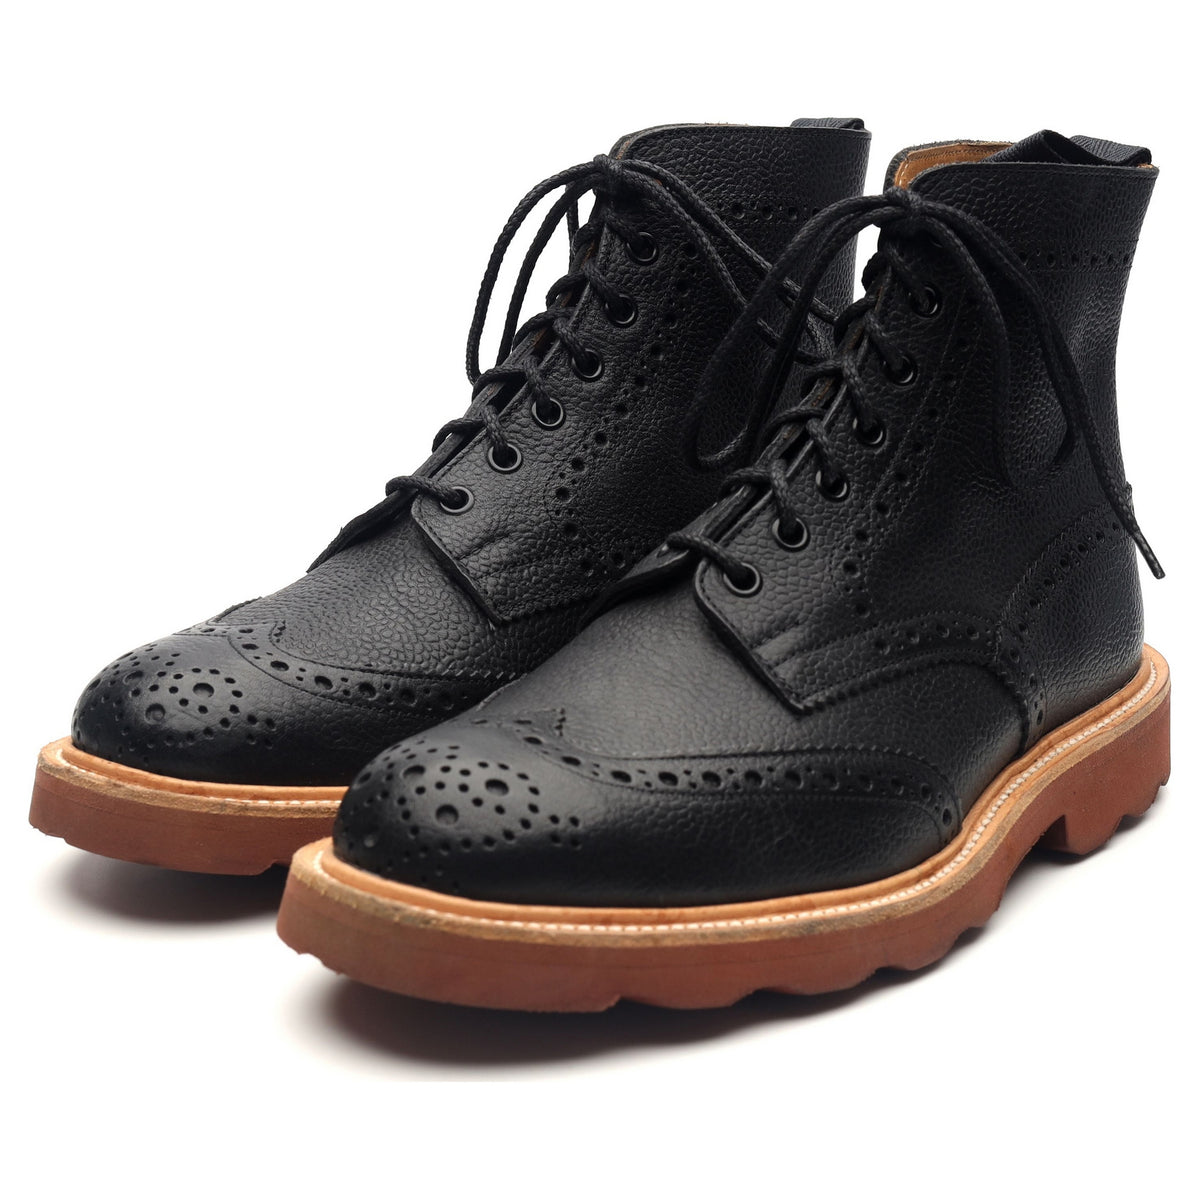 Black Leather Brogue Boots UK 6.5